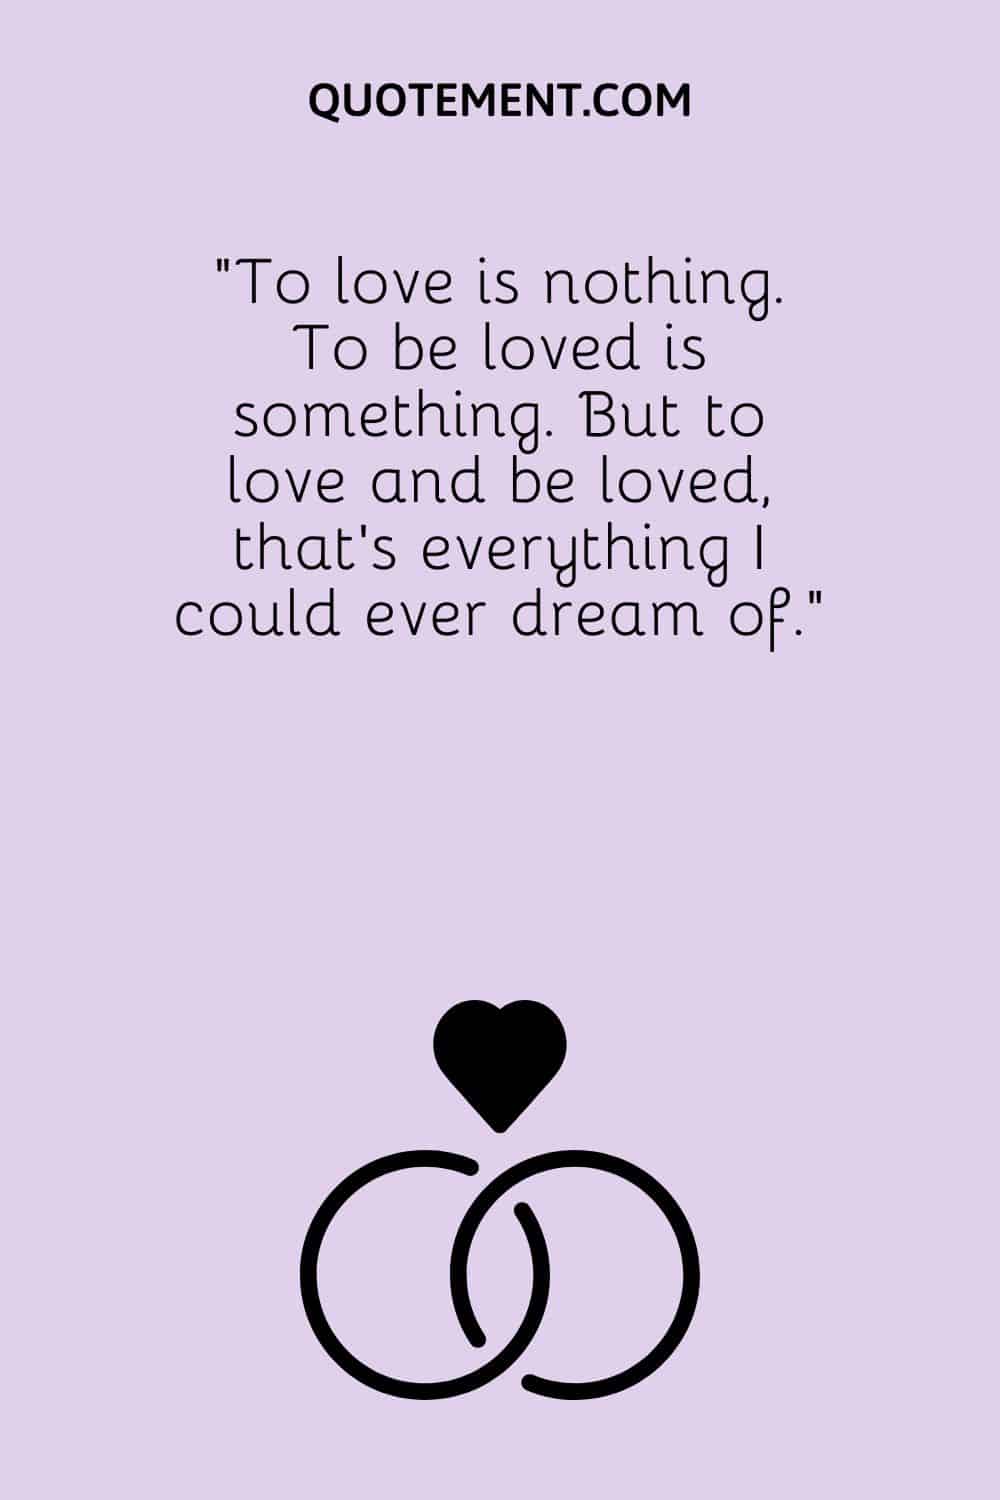 To love is nothing. To be loved is something